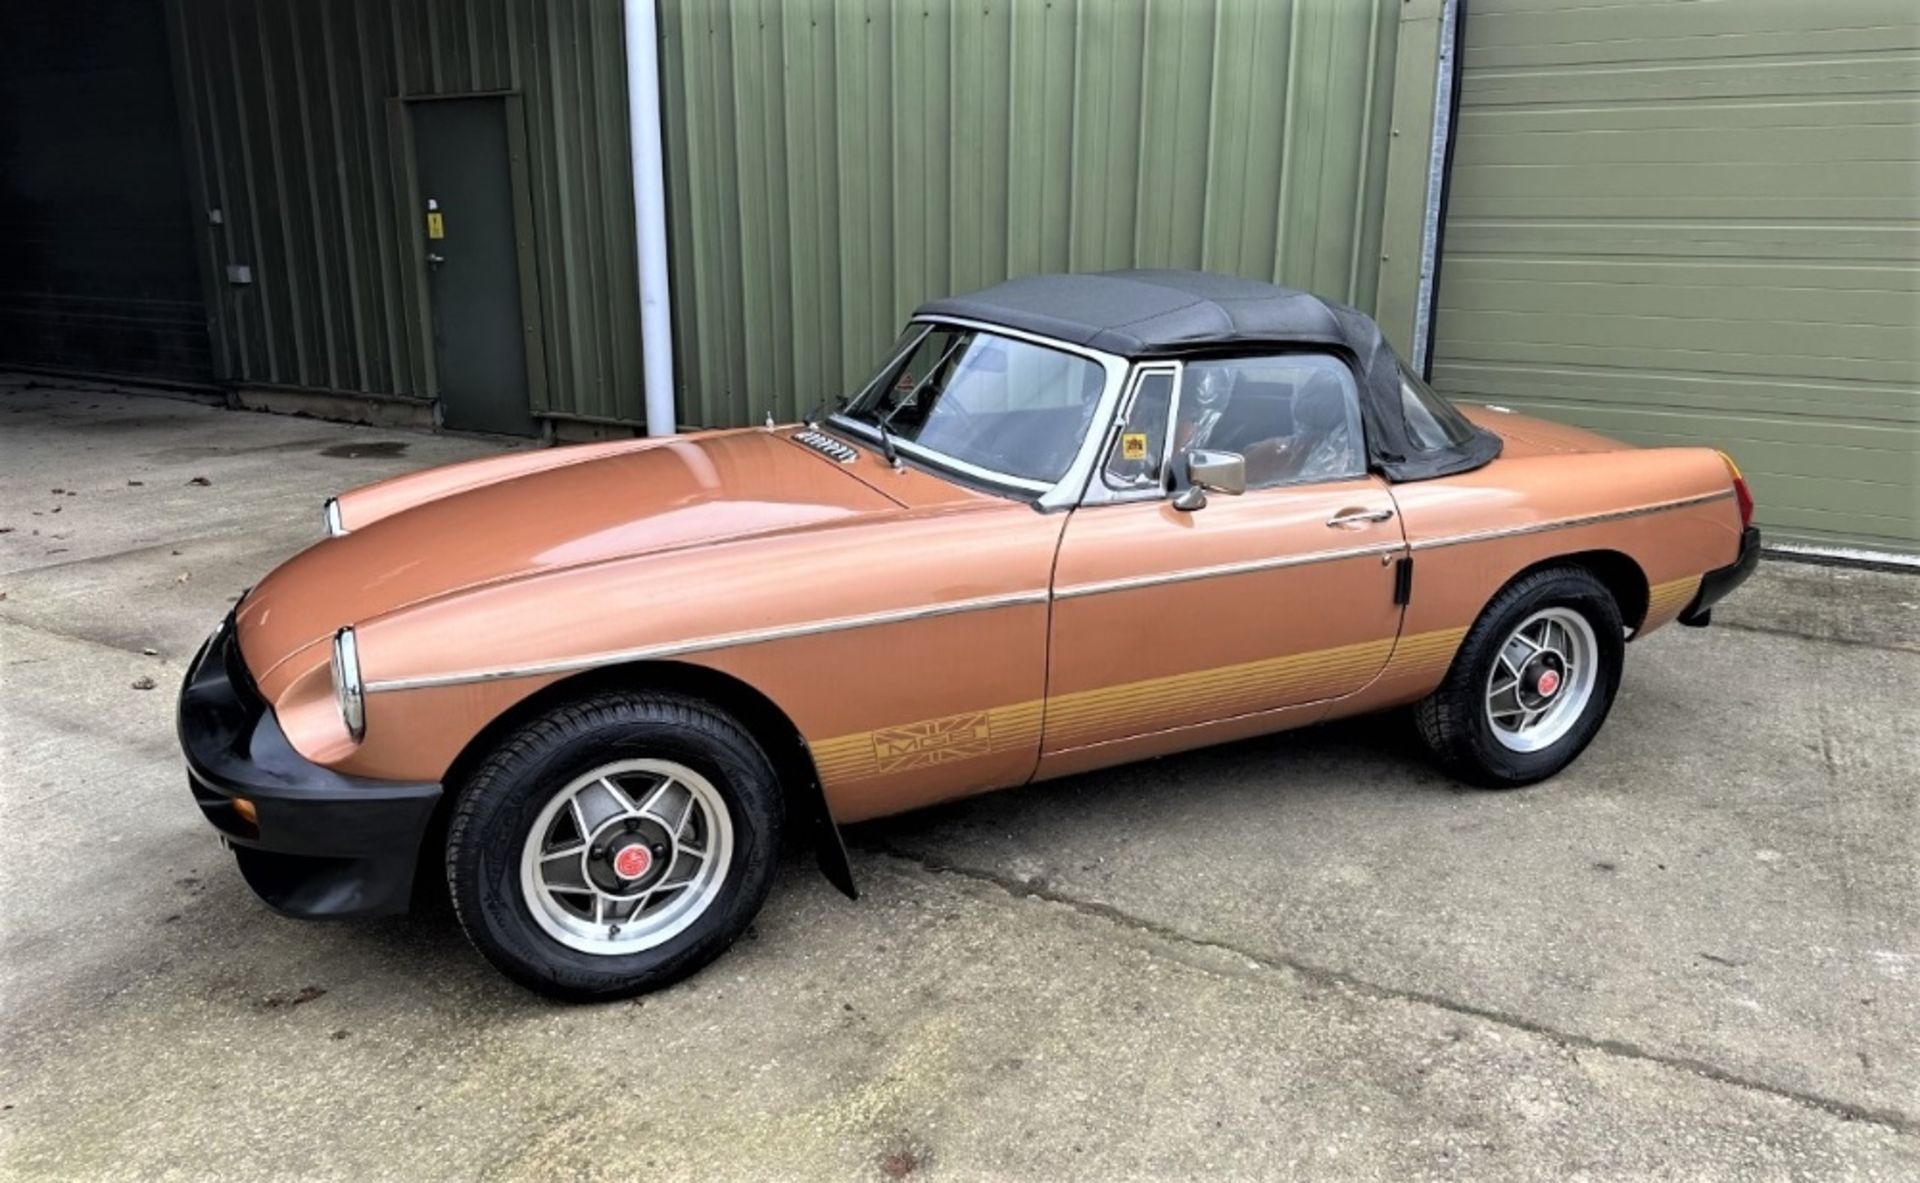 1981 MGB LE ROADSTER - offered at No Reserve Registration Number: DYB 848X Chassis Number: - Image 2 of 16